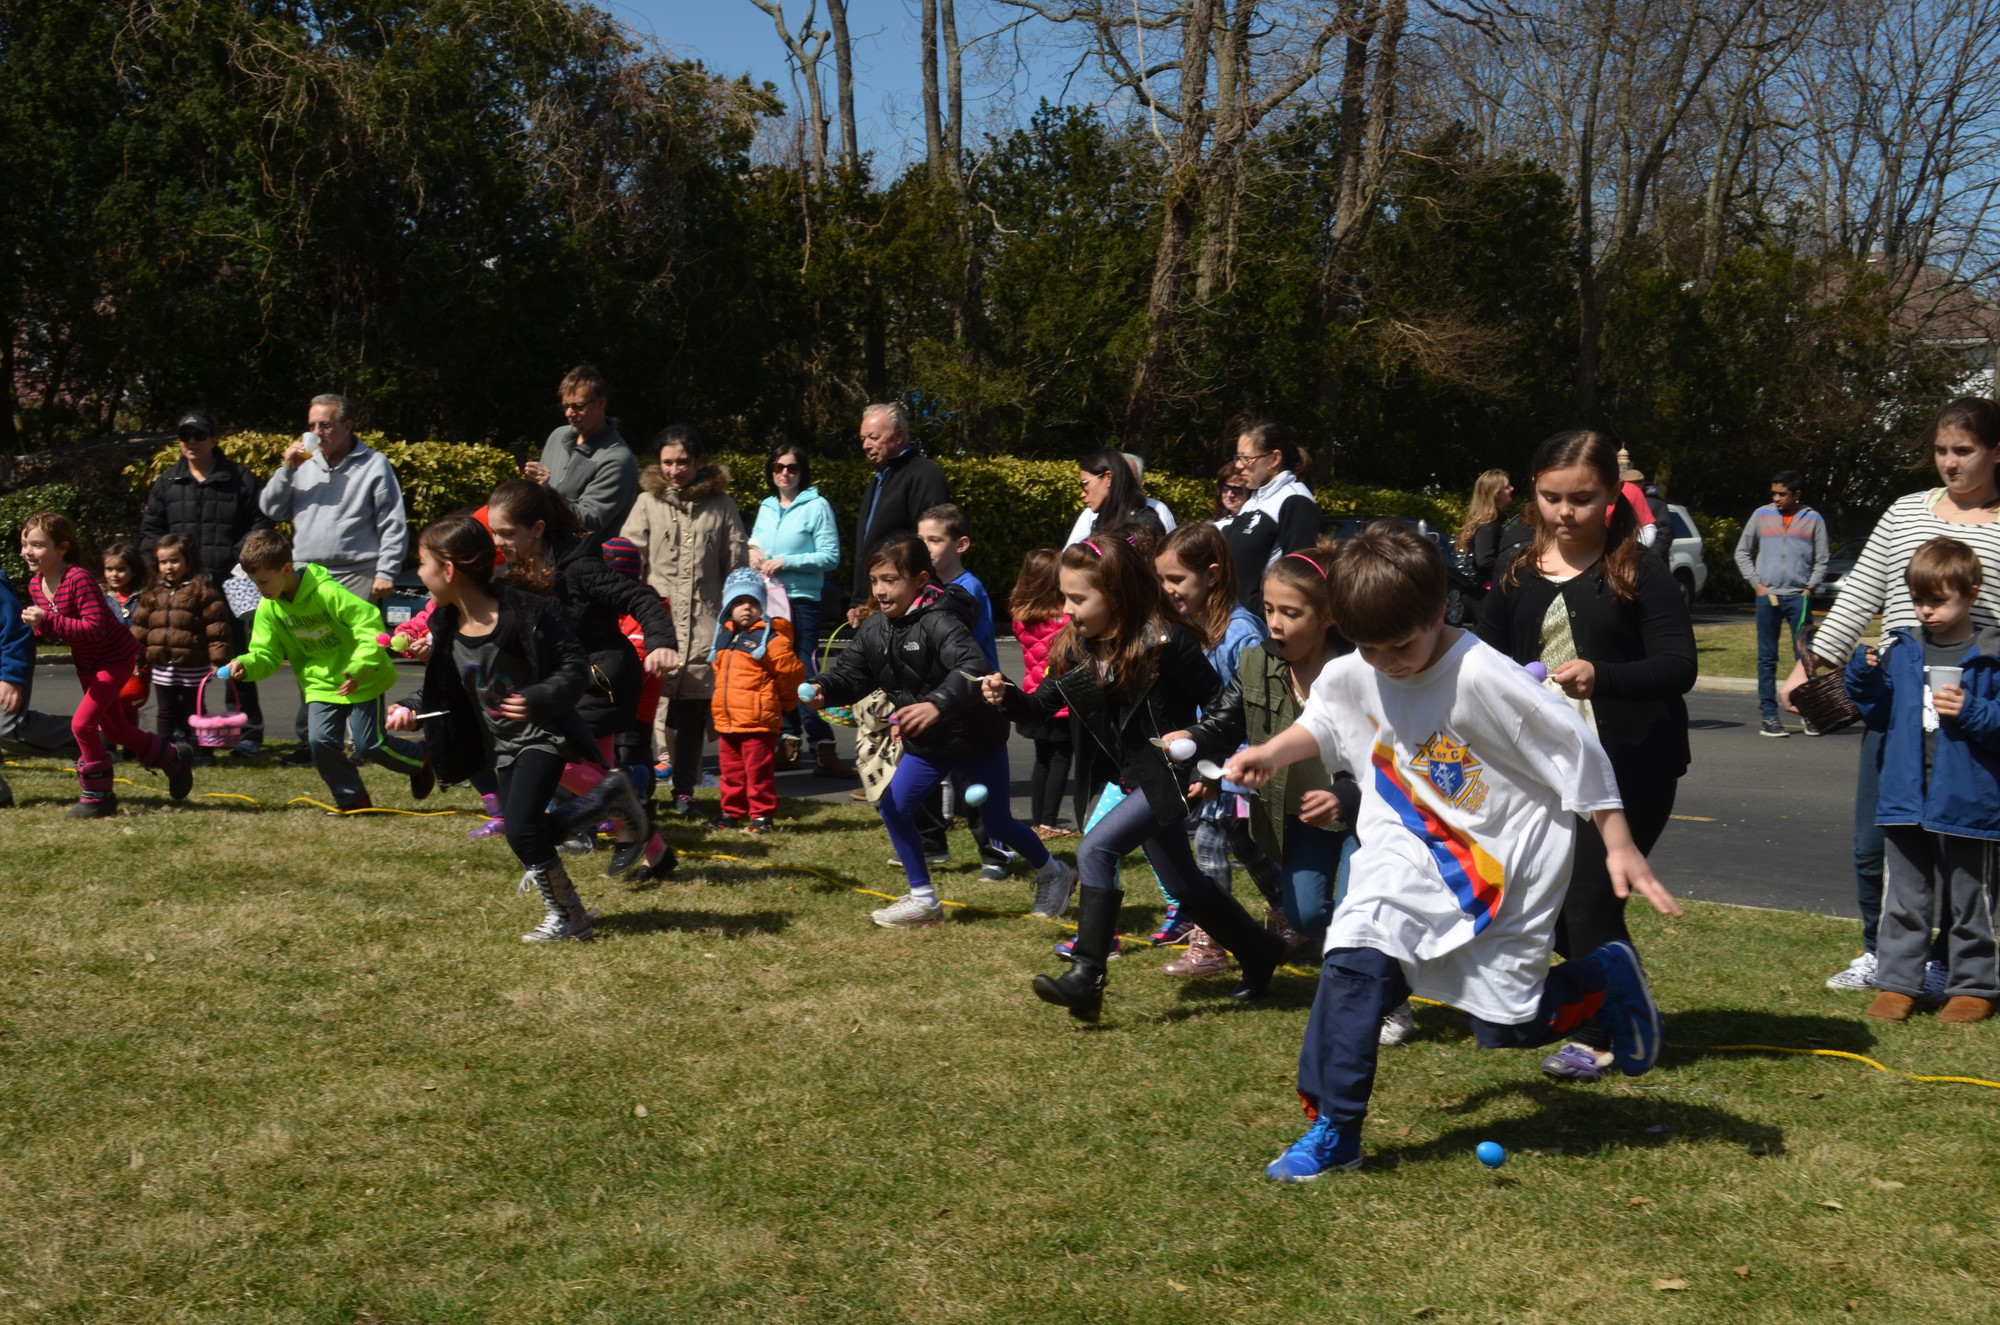 The Father John Farrell Council 5962 Knights of Columbus held their annual Easter Egg Roll at St. Joseph’s R.C. Church in Hewlett, where the children competed in egg on a spoon races.